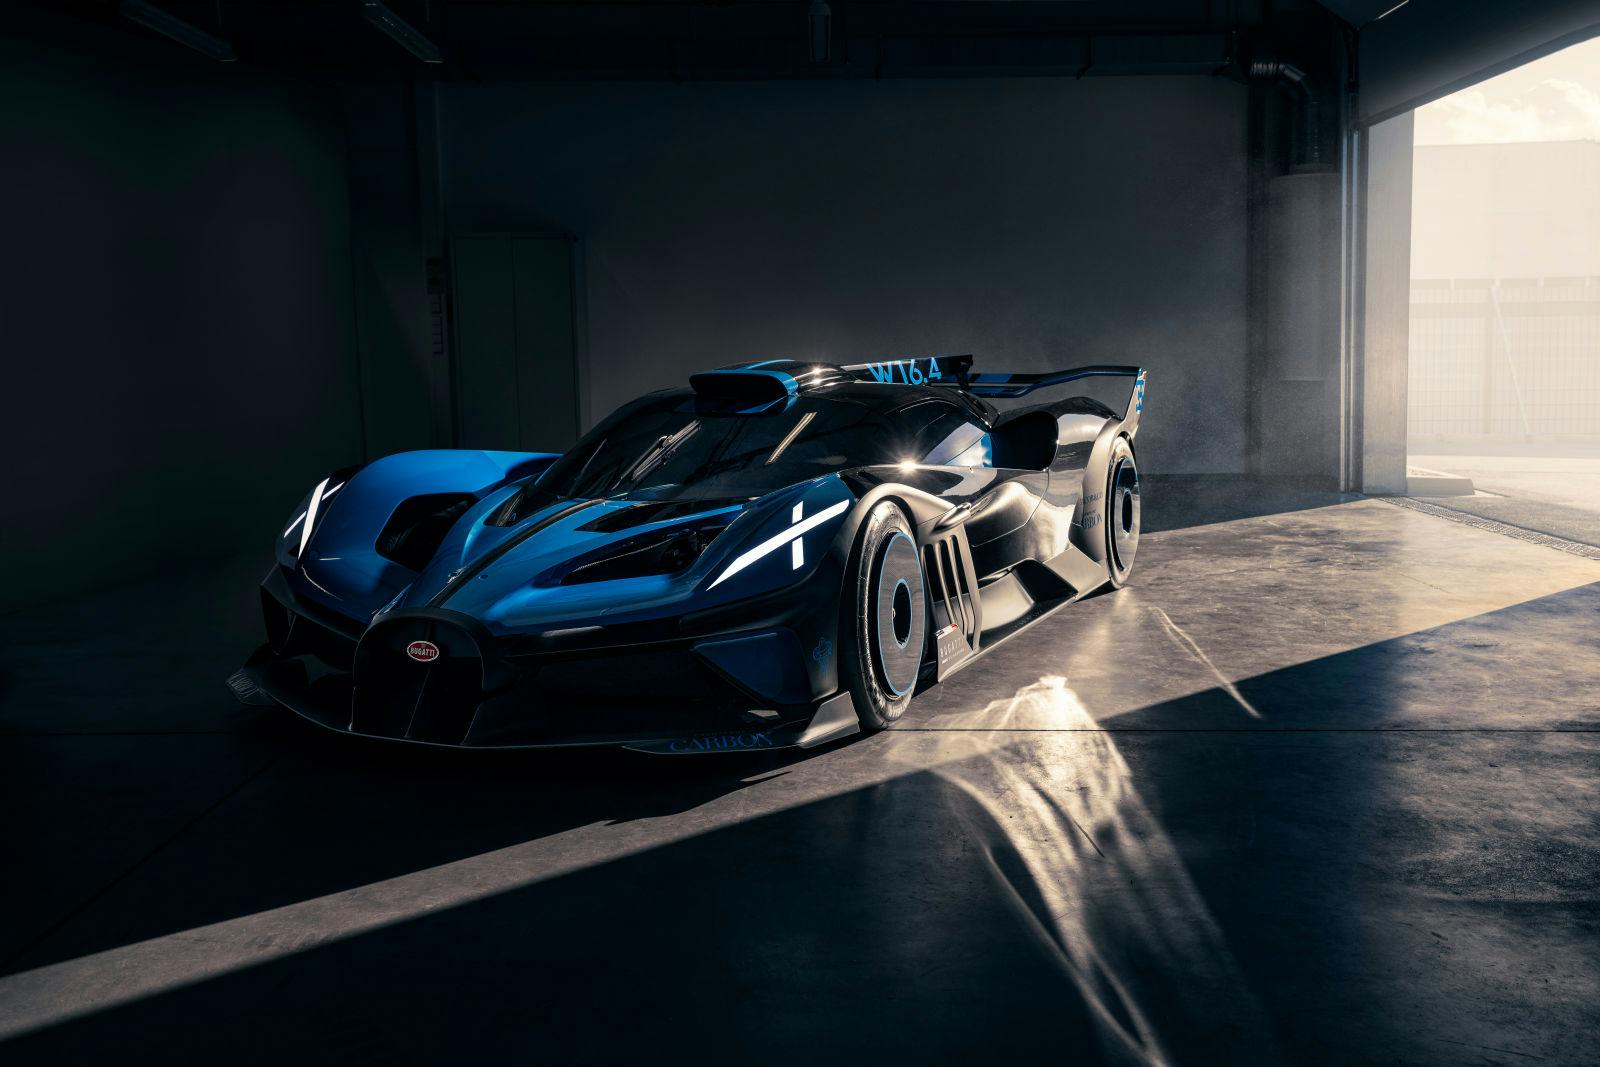 The Bugatti Bolide is real: the technical concept is drivable.